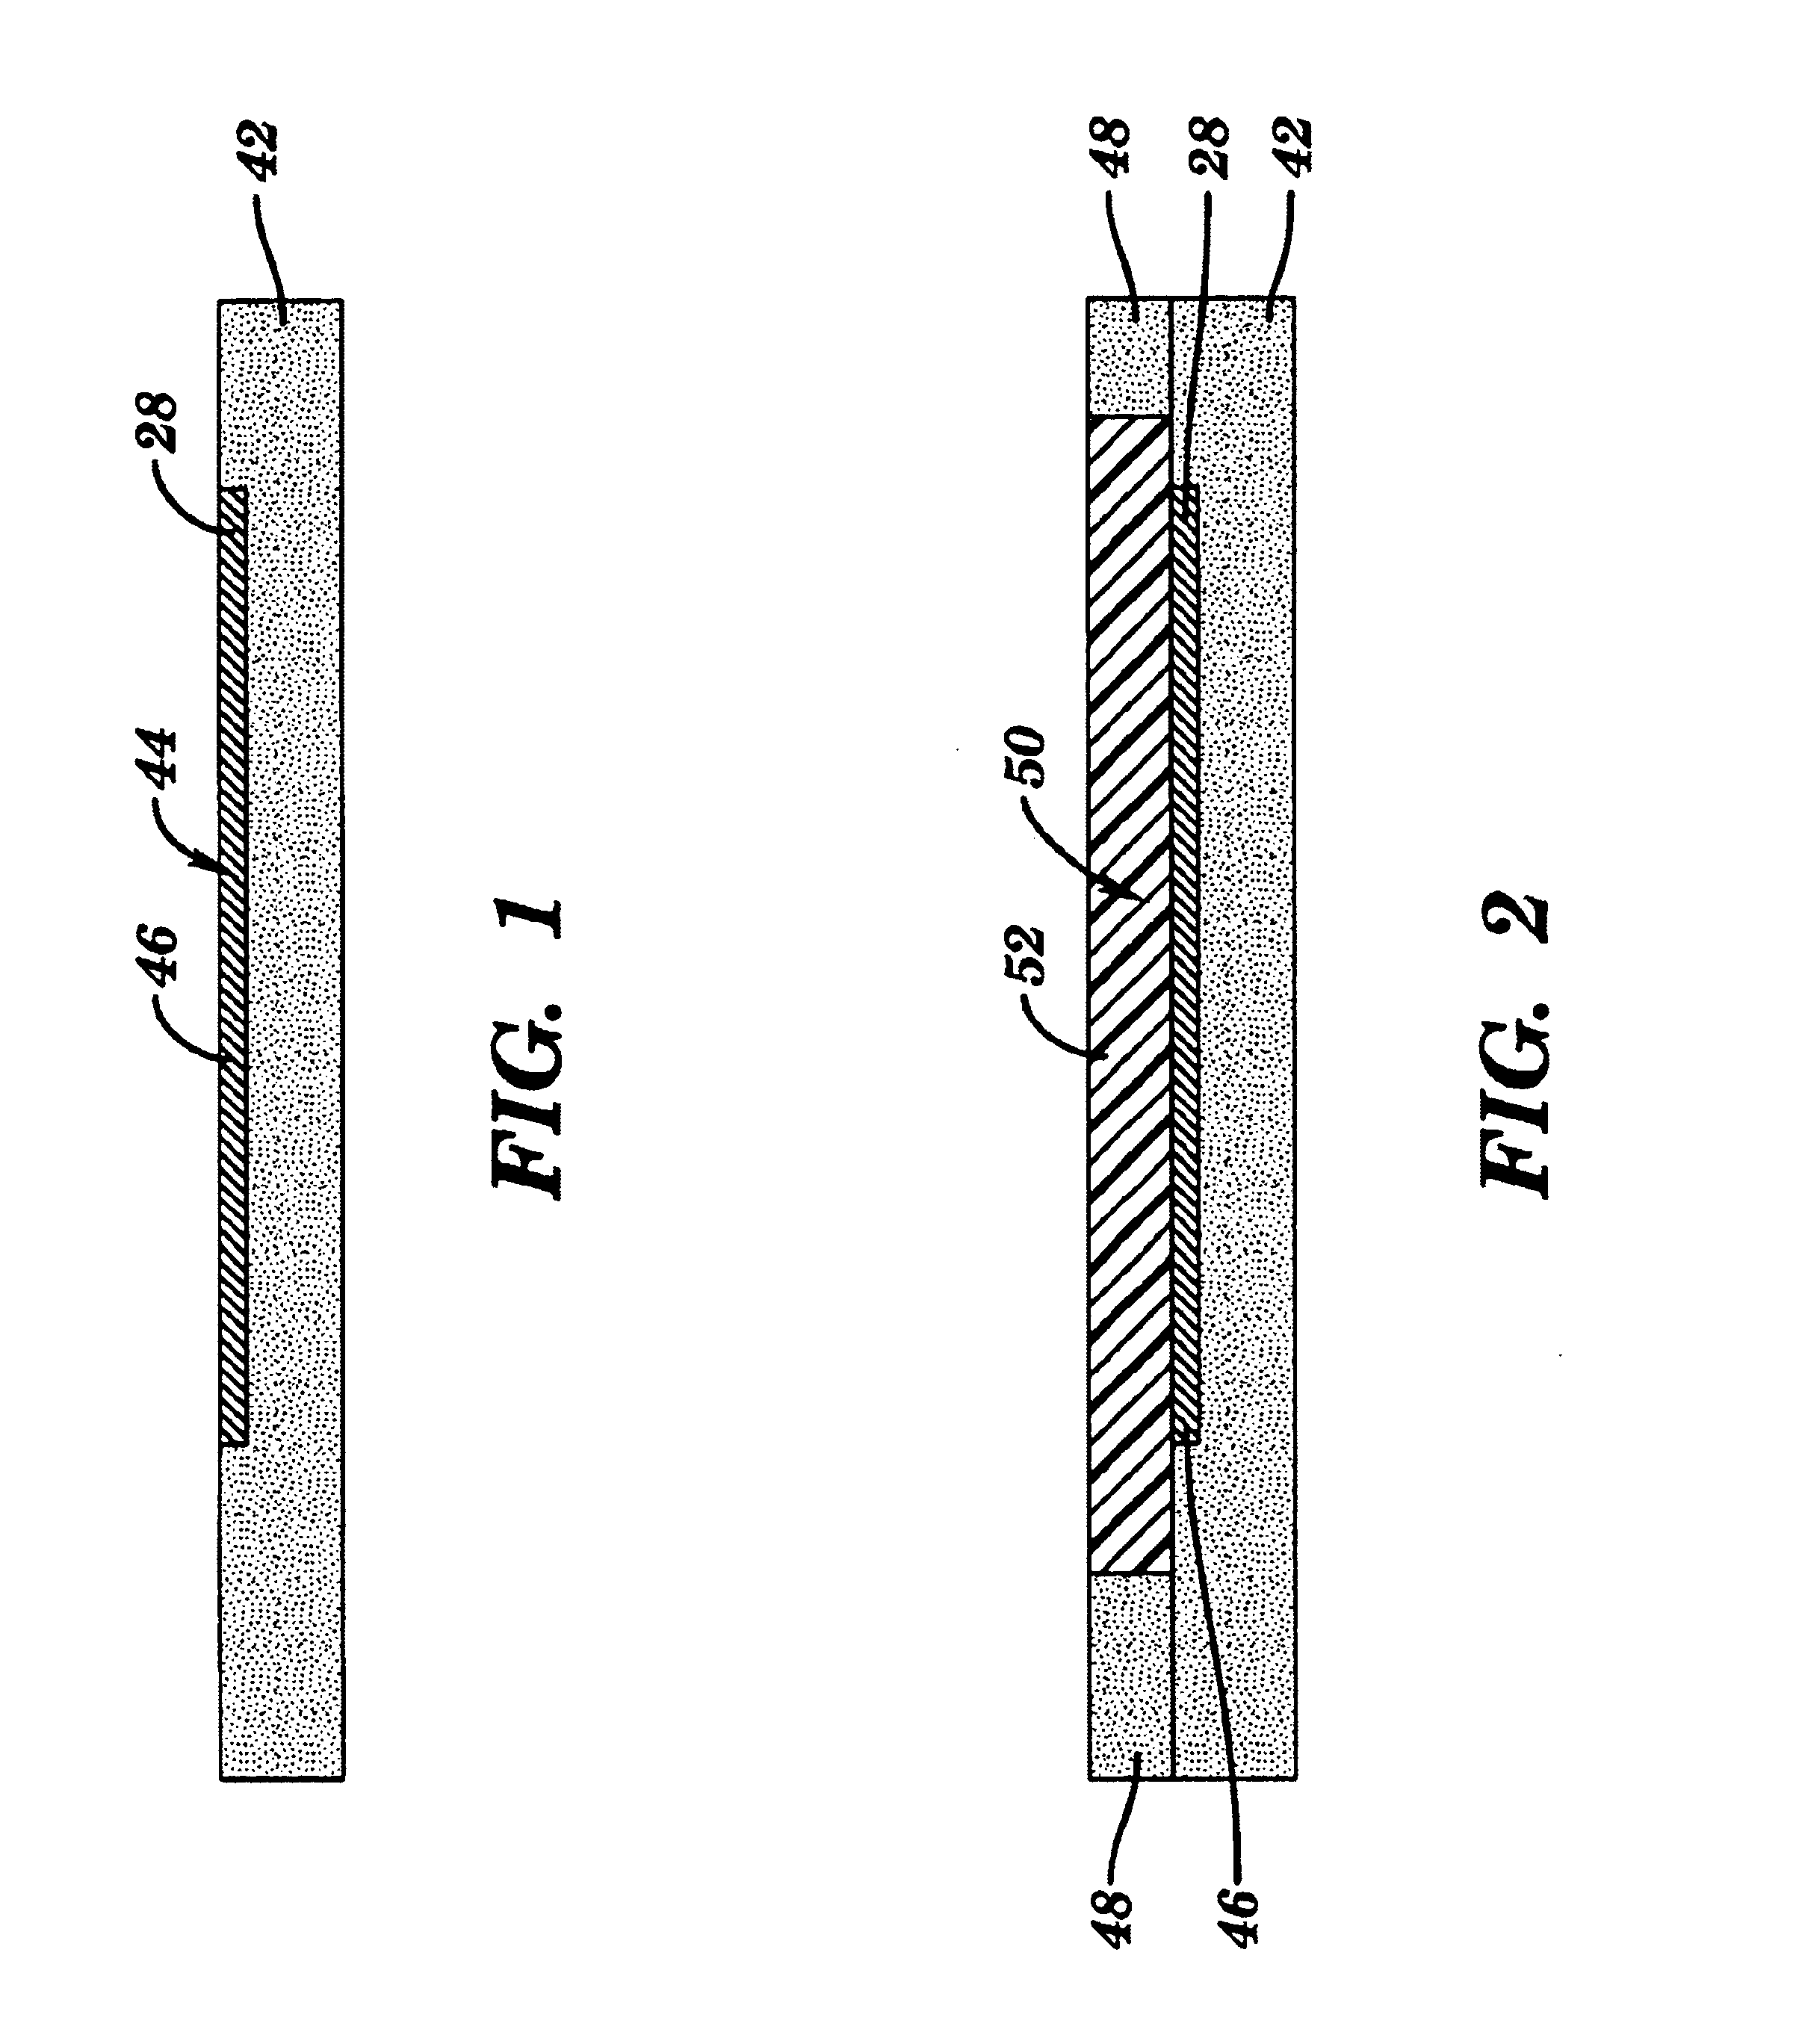 Accelerometer and methods thereof